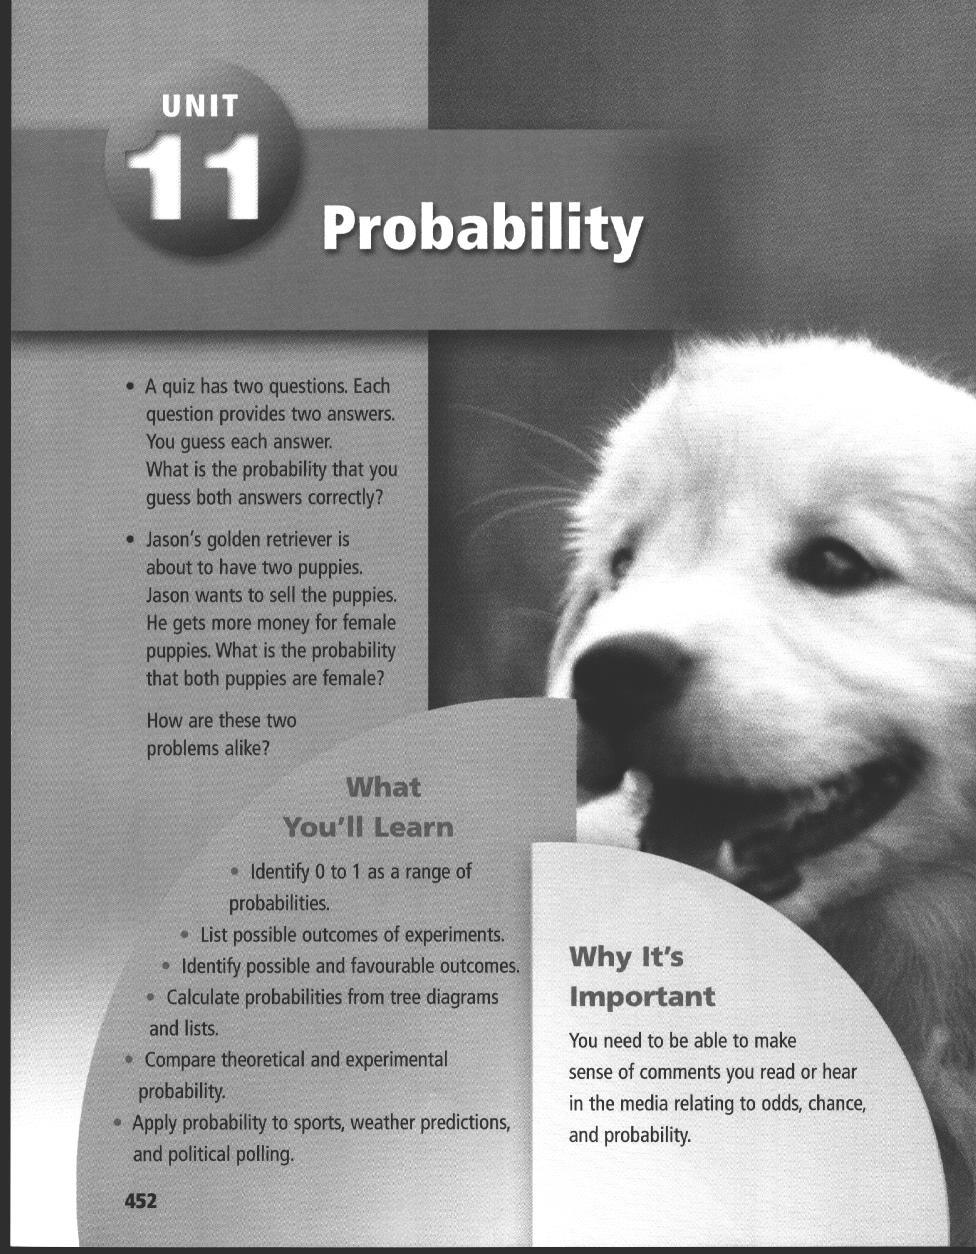 Probability A quiz has two questions Each question provides two answers. You guess each answer What is the probability that you guess both answers eoirectty?